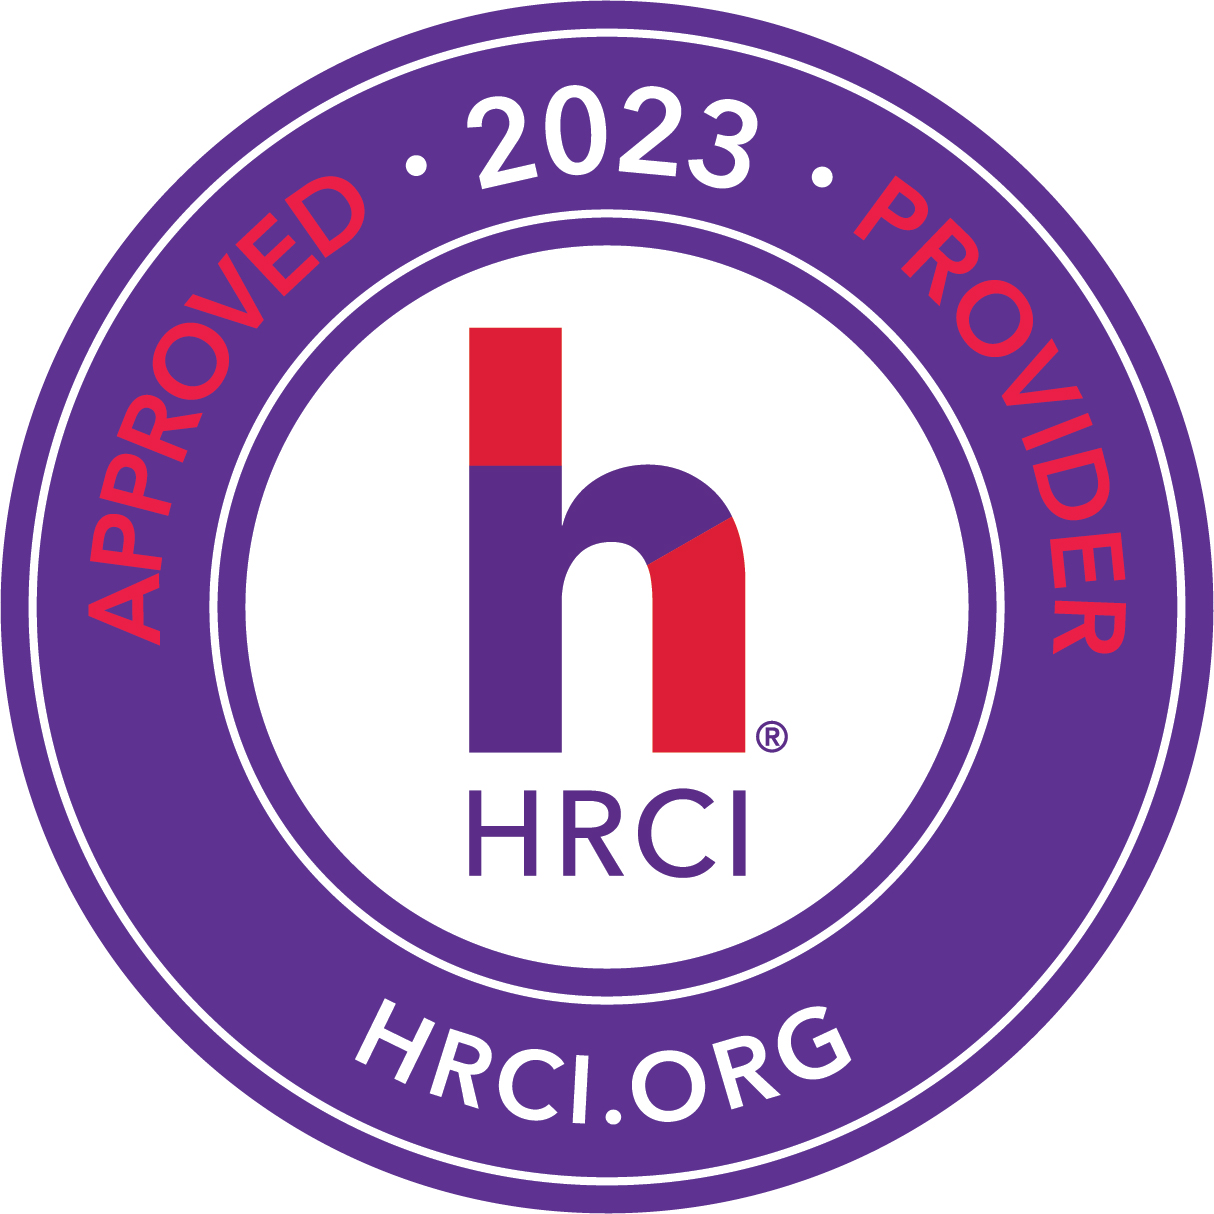 This BusinessWatch Network Webinar is an Approved HRCI Training EventNetwork is an HRCI Approved Provider